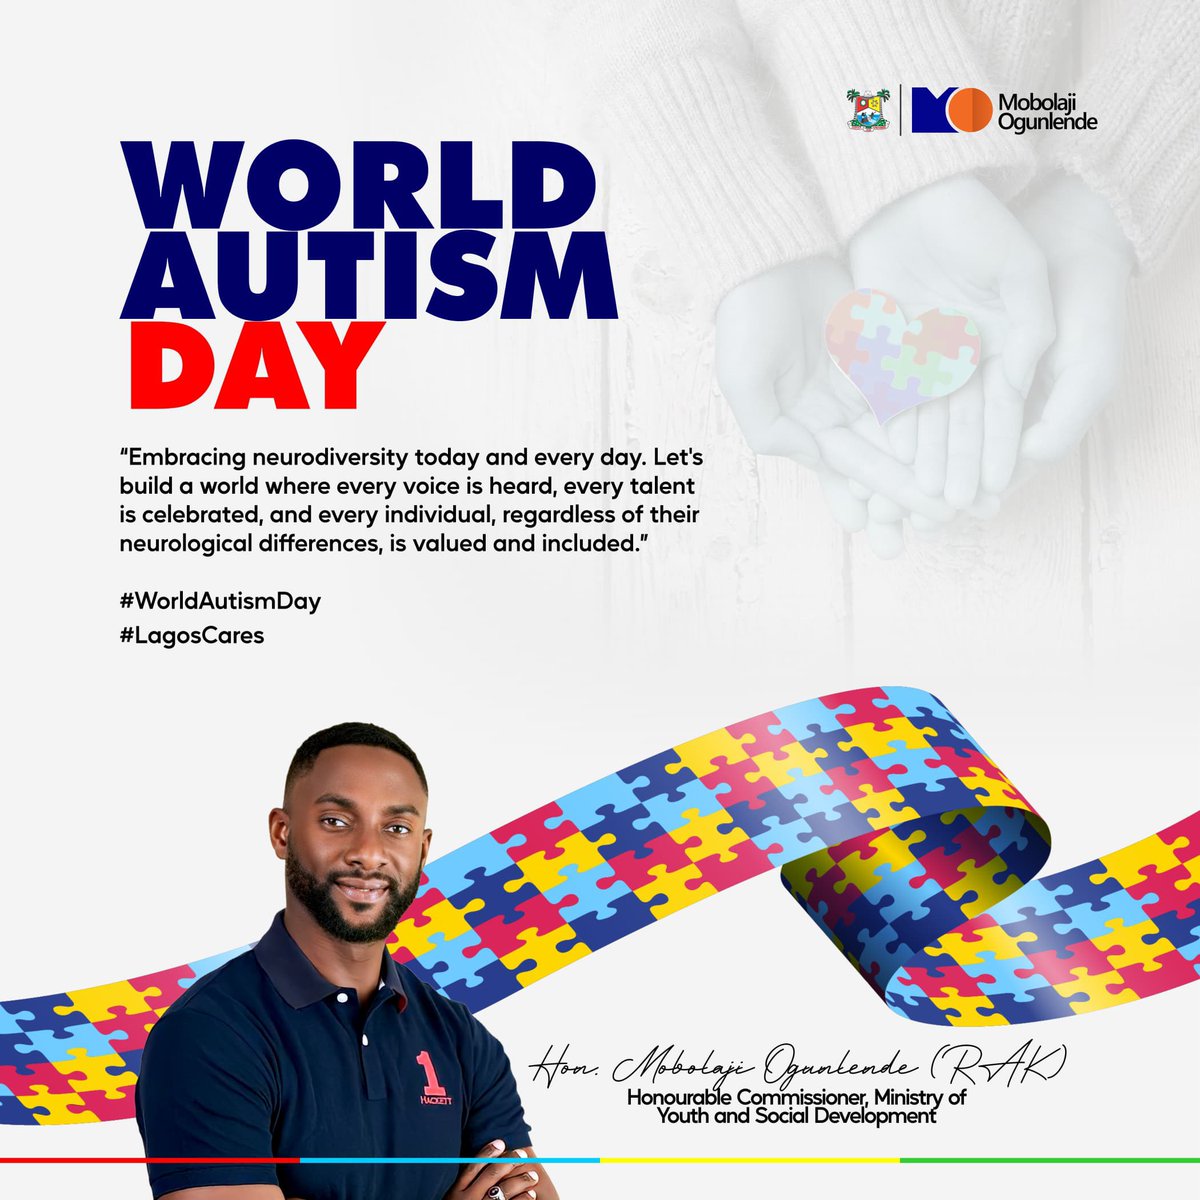 “Embracing neurodiversity today and every day. Let’s build a world where every voice is heard, every talent is celebrated, and every individual, regardless of their neurological differences, is valued and included.”

#WorldAutismDay
#RisingStar✨
#LagosCares 

Cc: @officiallasoda